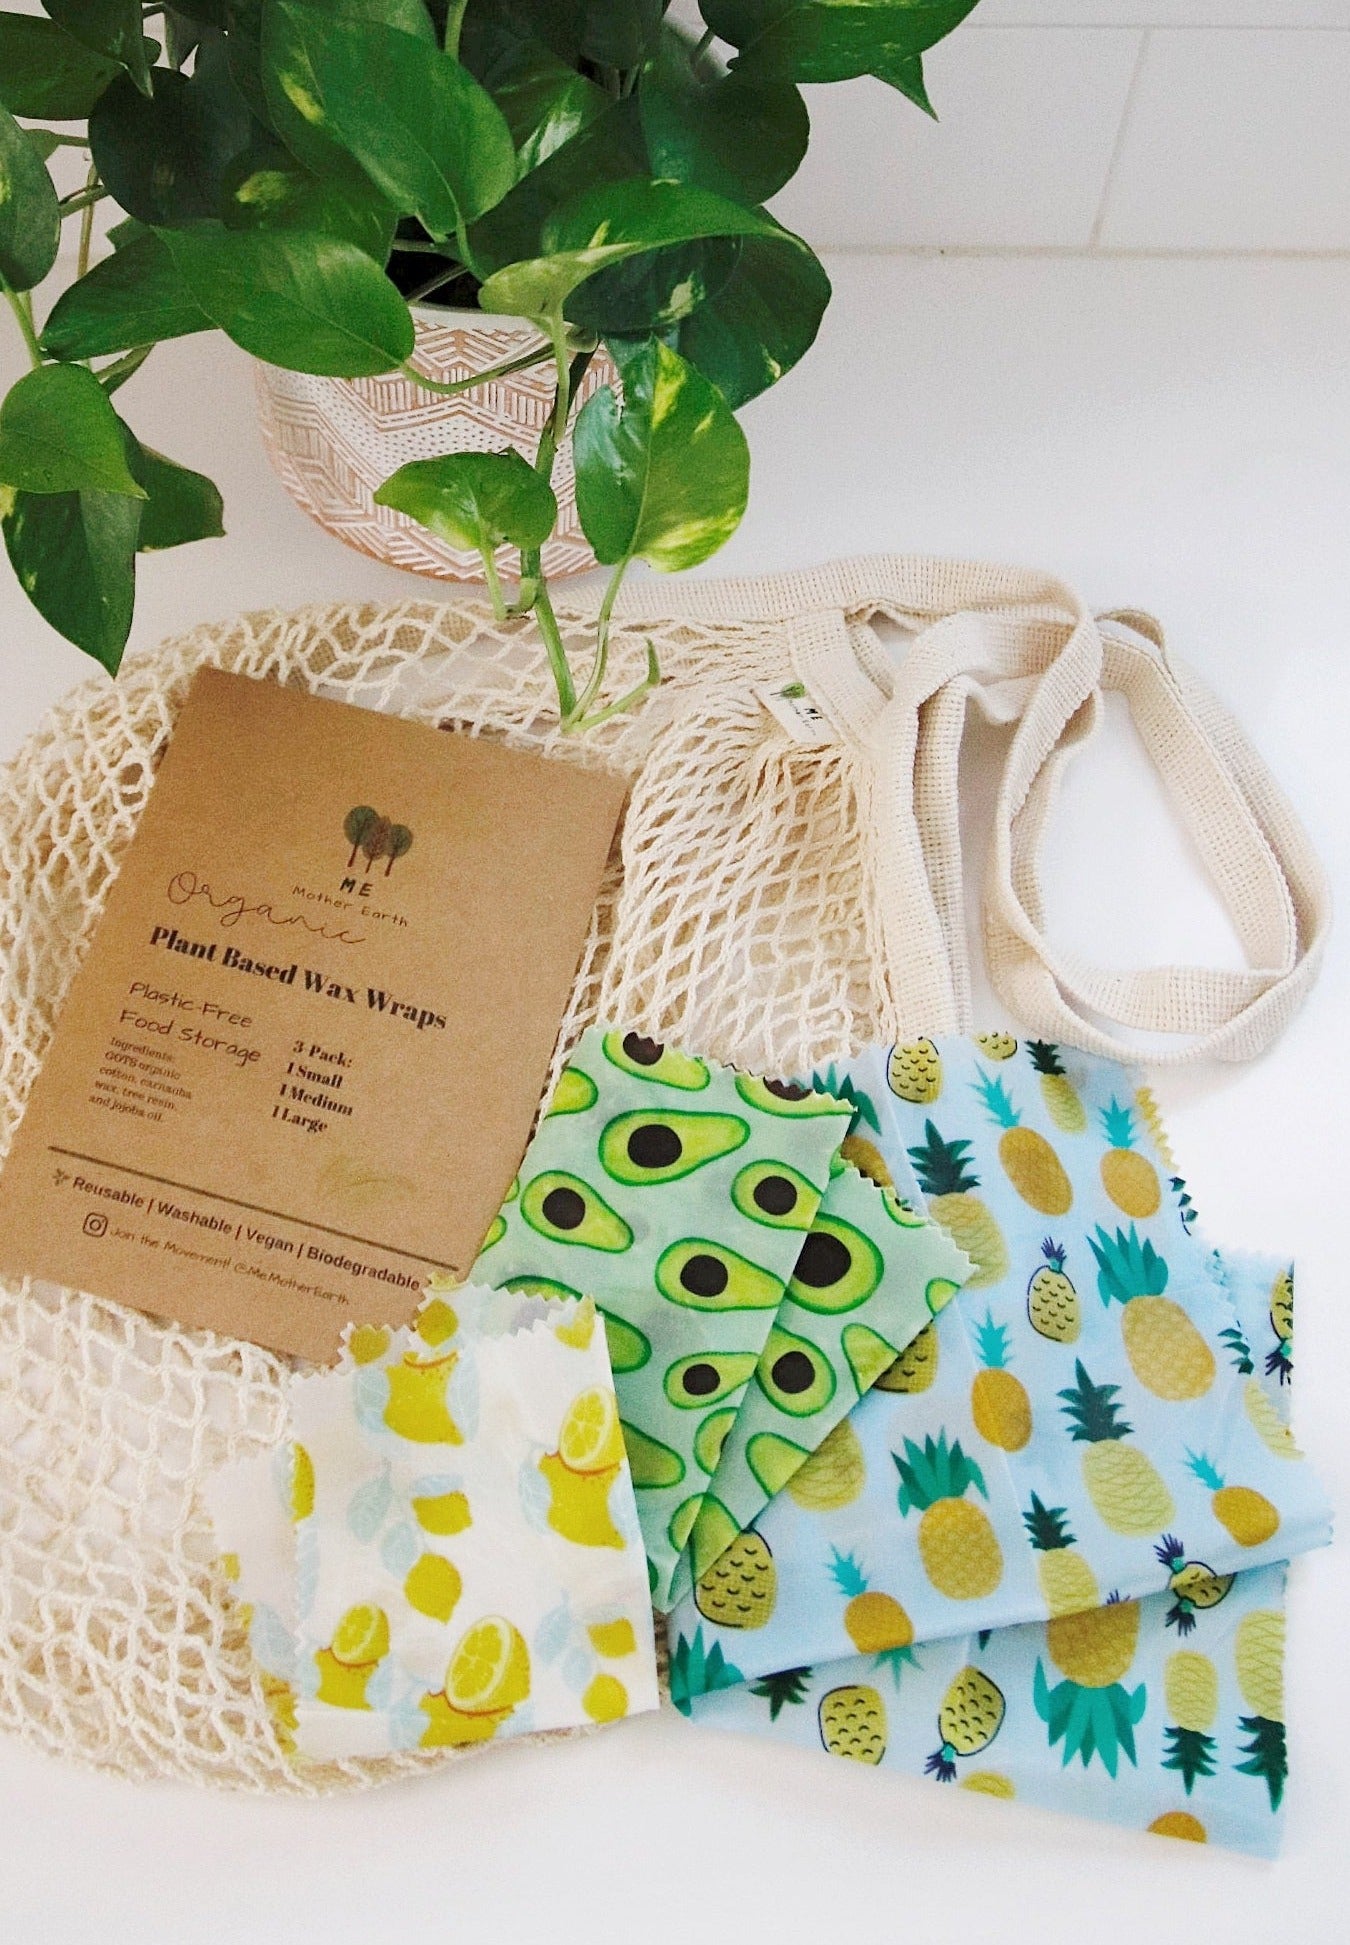 The Waste Less Shop Beeswax Food Wraps Sale